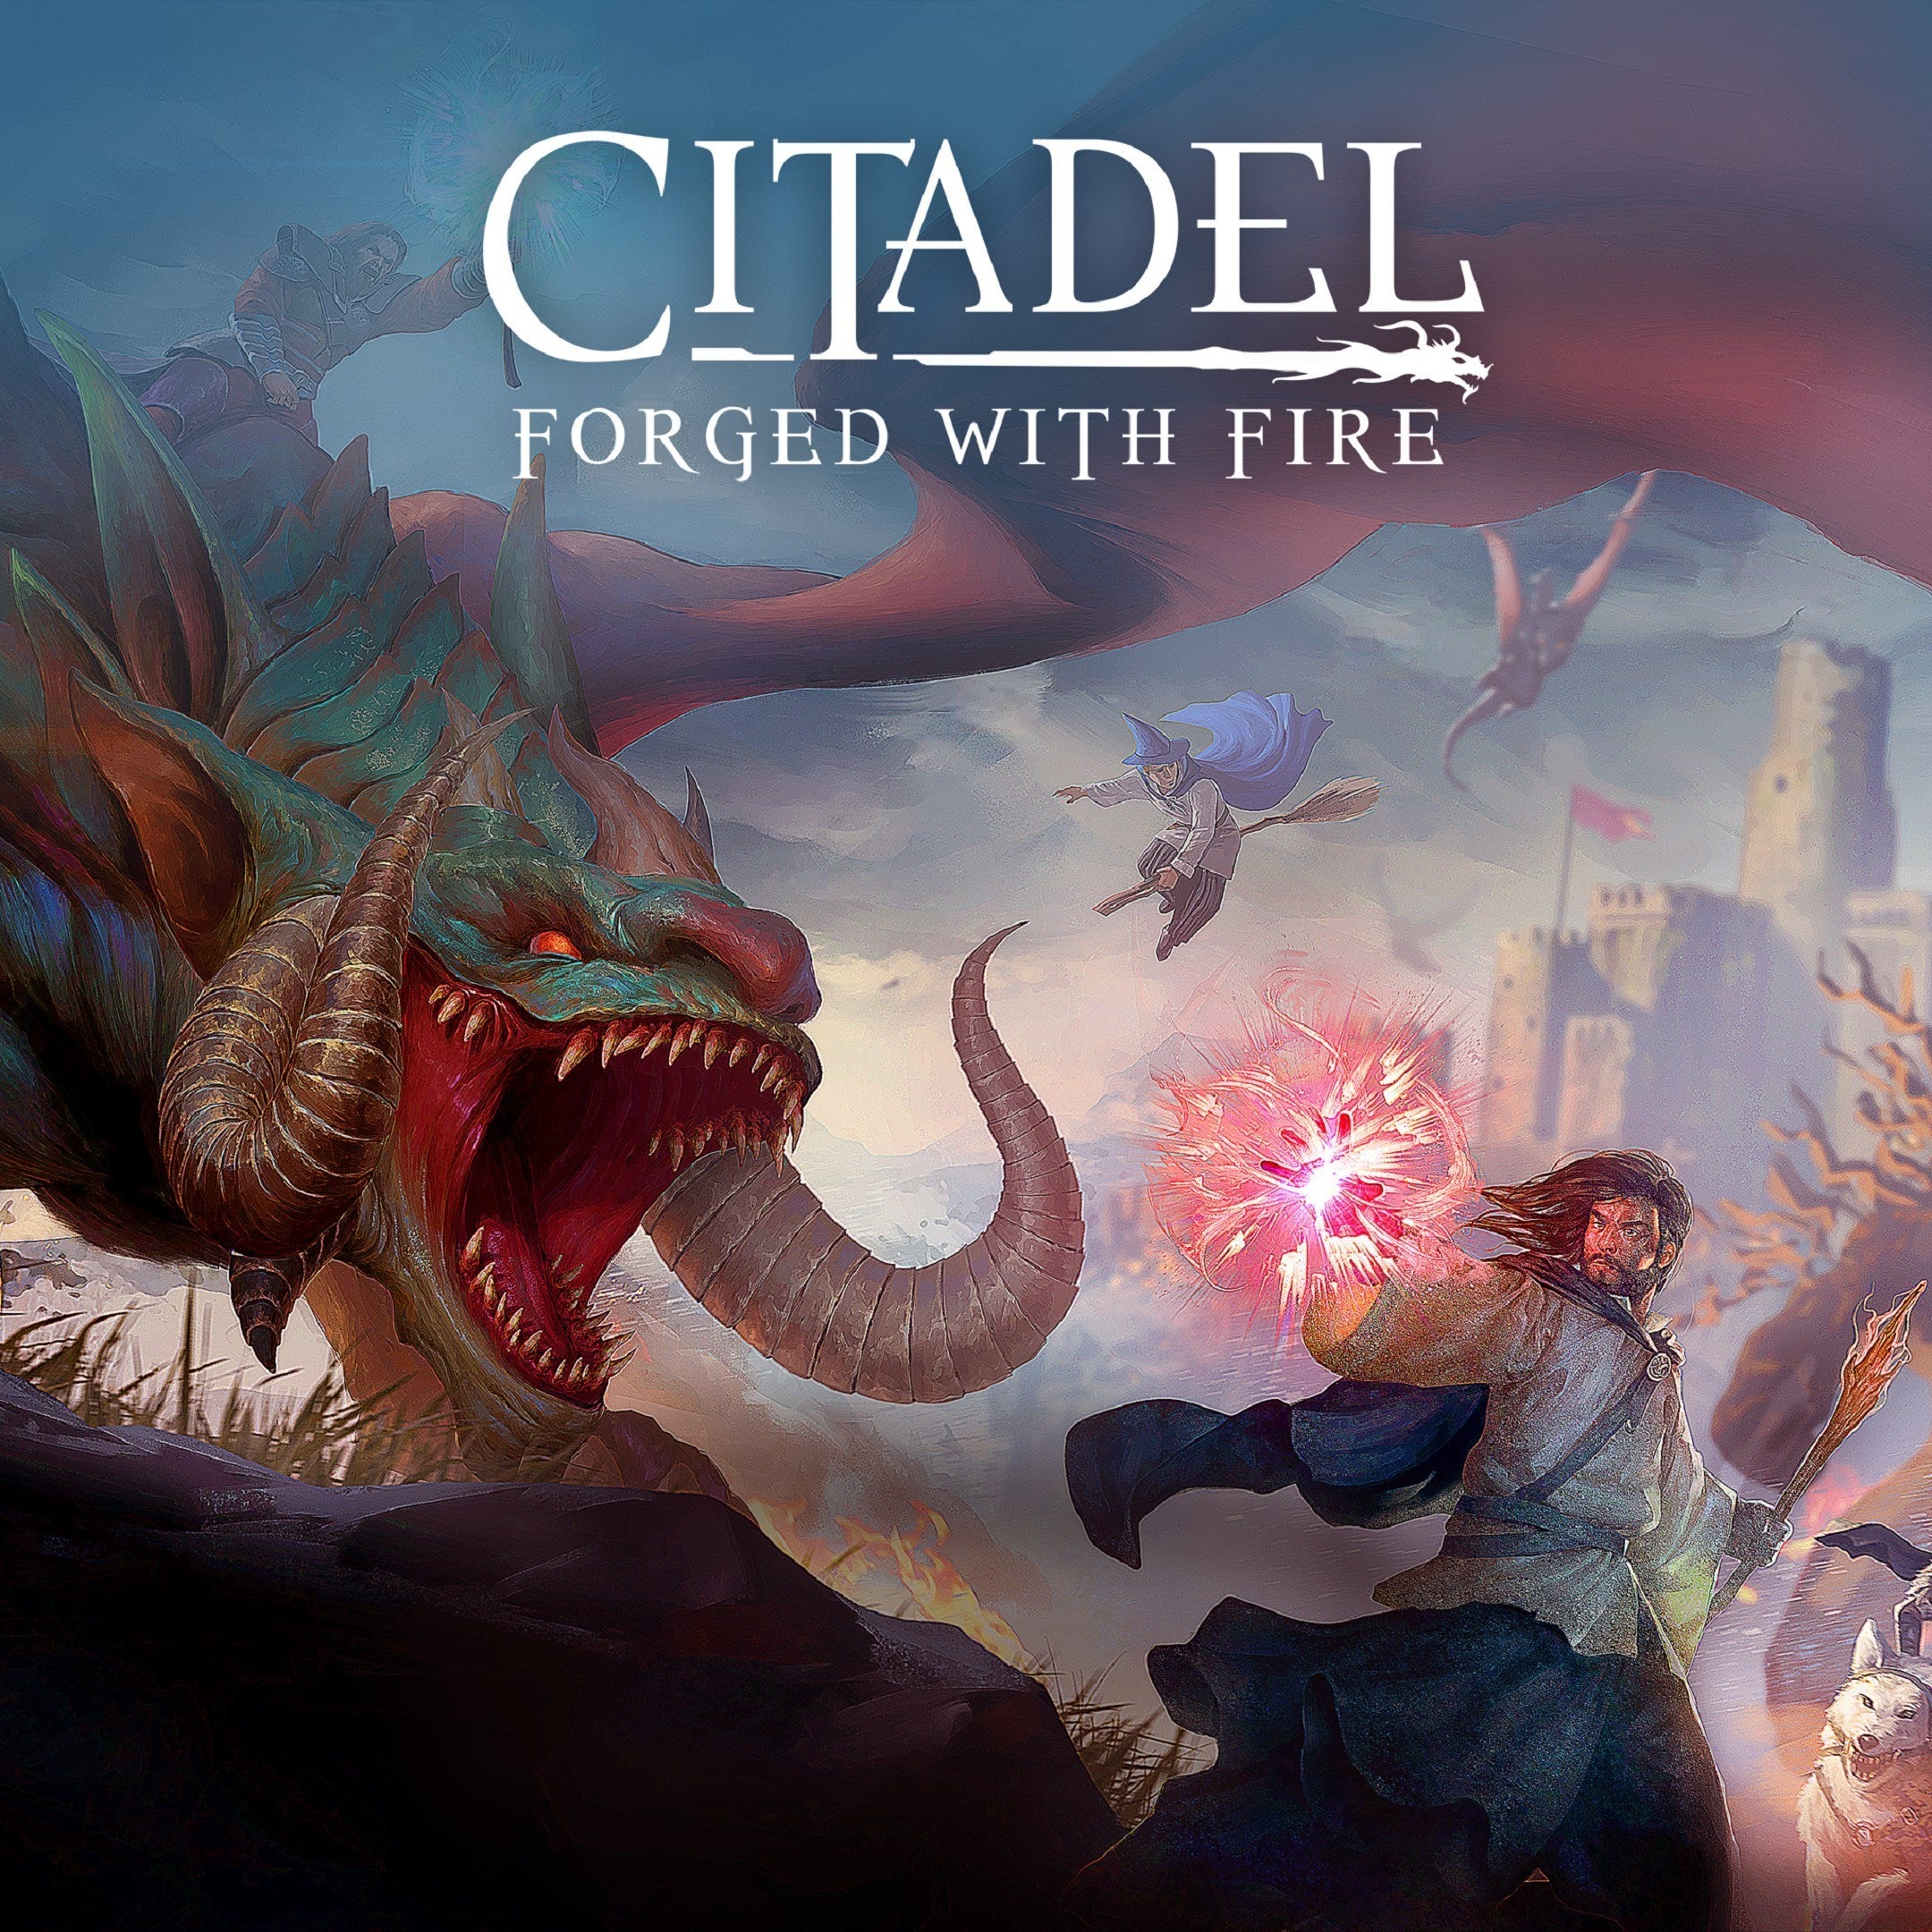 Citadel: Forged With Fire Brings Dragons And Castles To Xbox One, Steam, and PlayStation 4, It Is Time To Forge Your Future